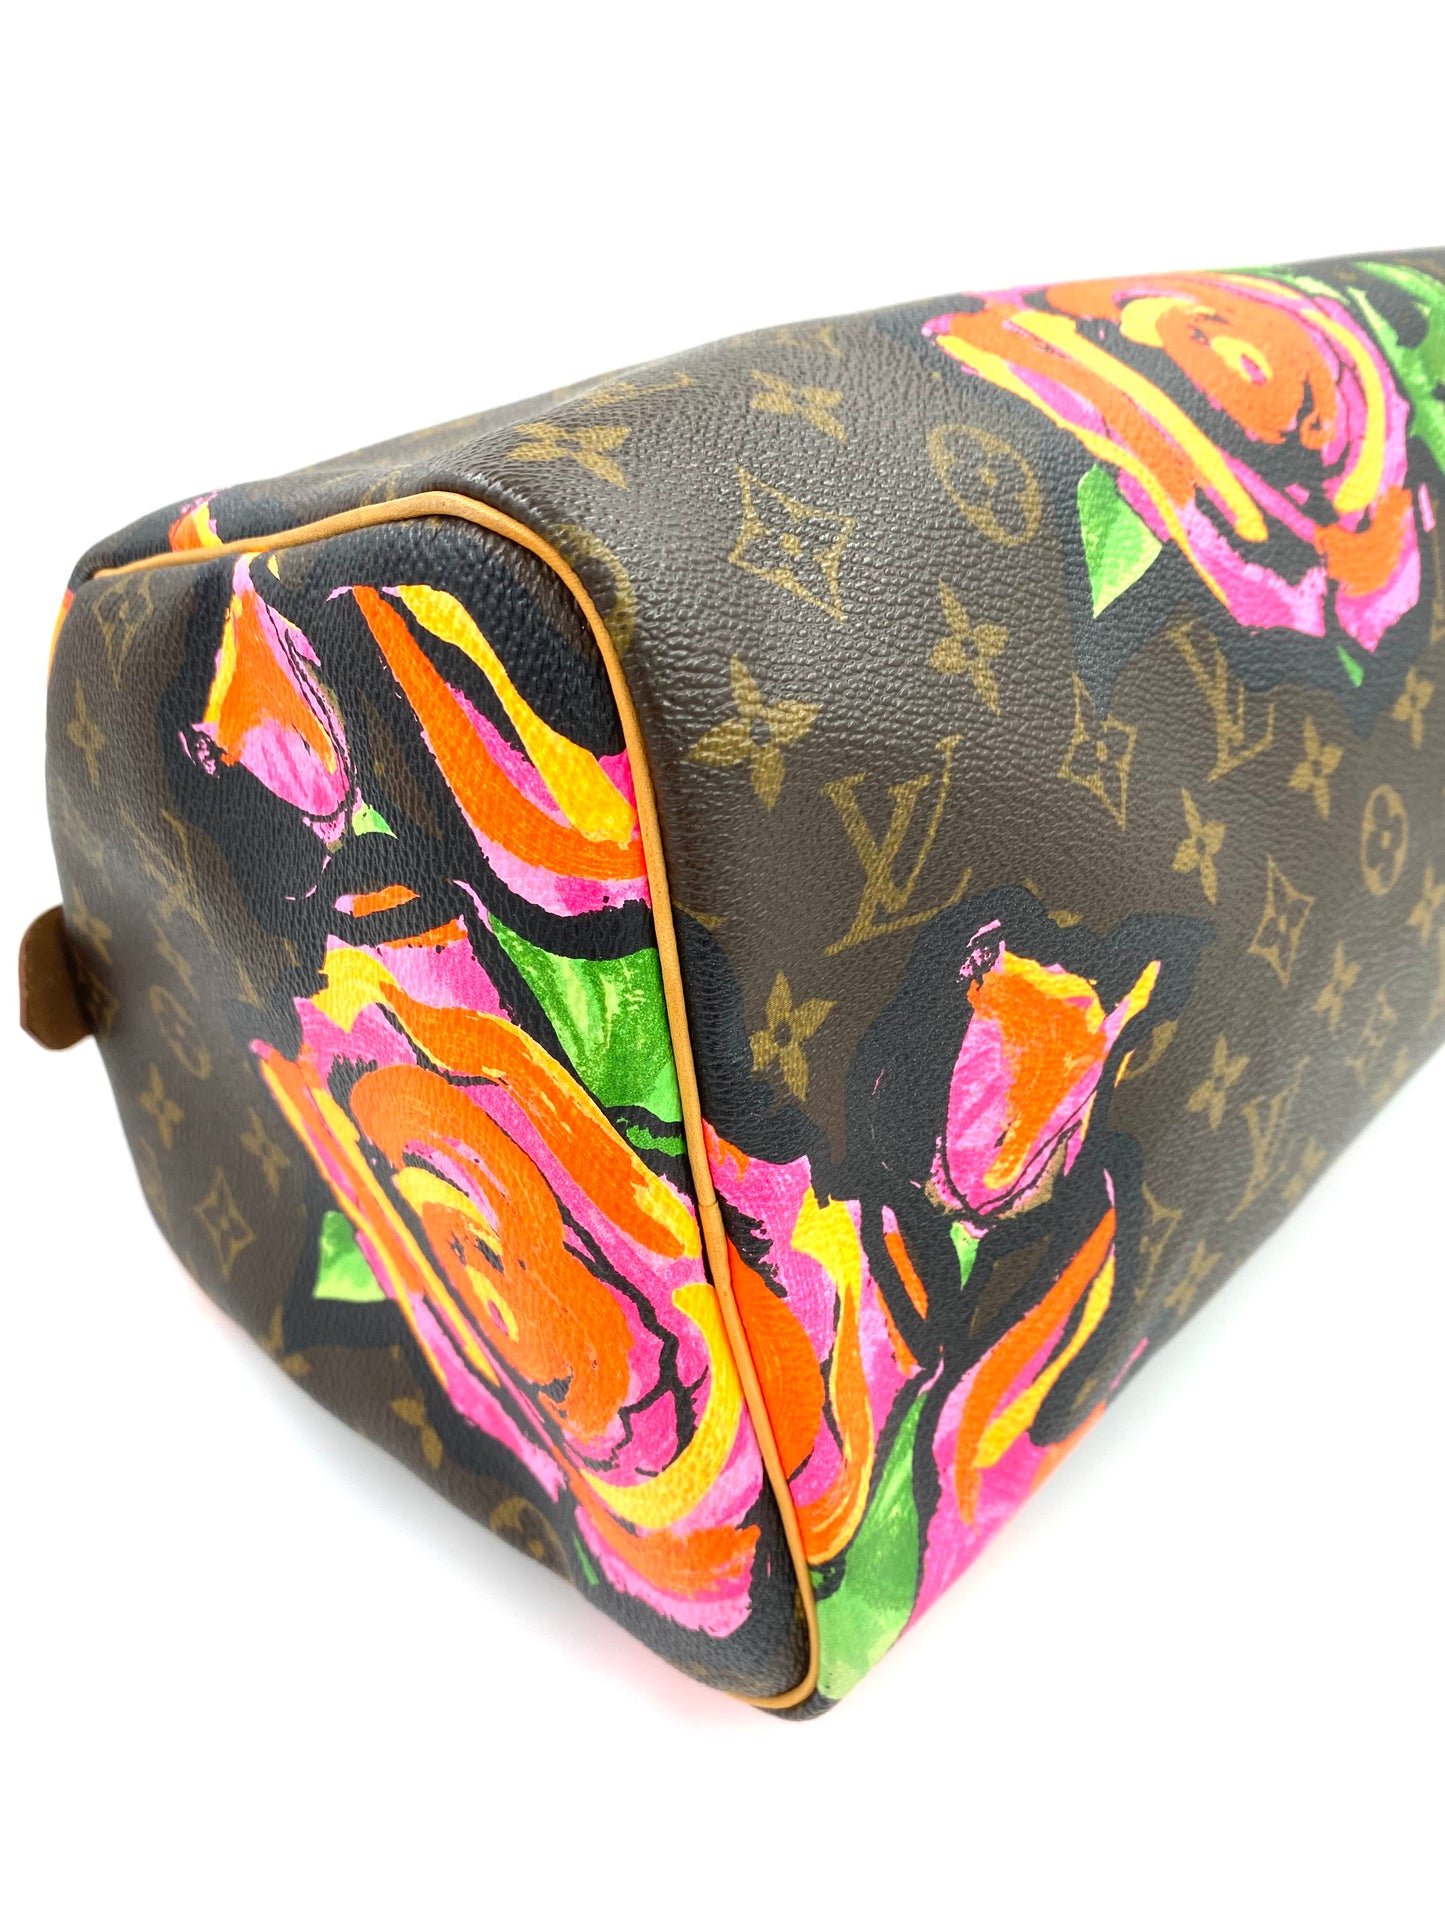 LOUIS VUITTON Speedy 30 Monogram Roses Stephen Sprouse Limited